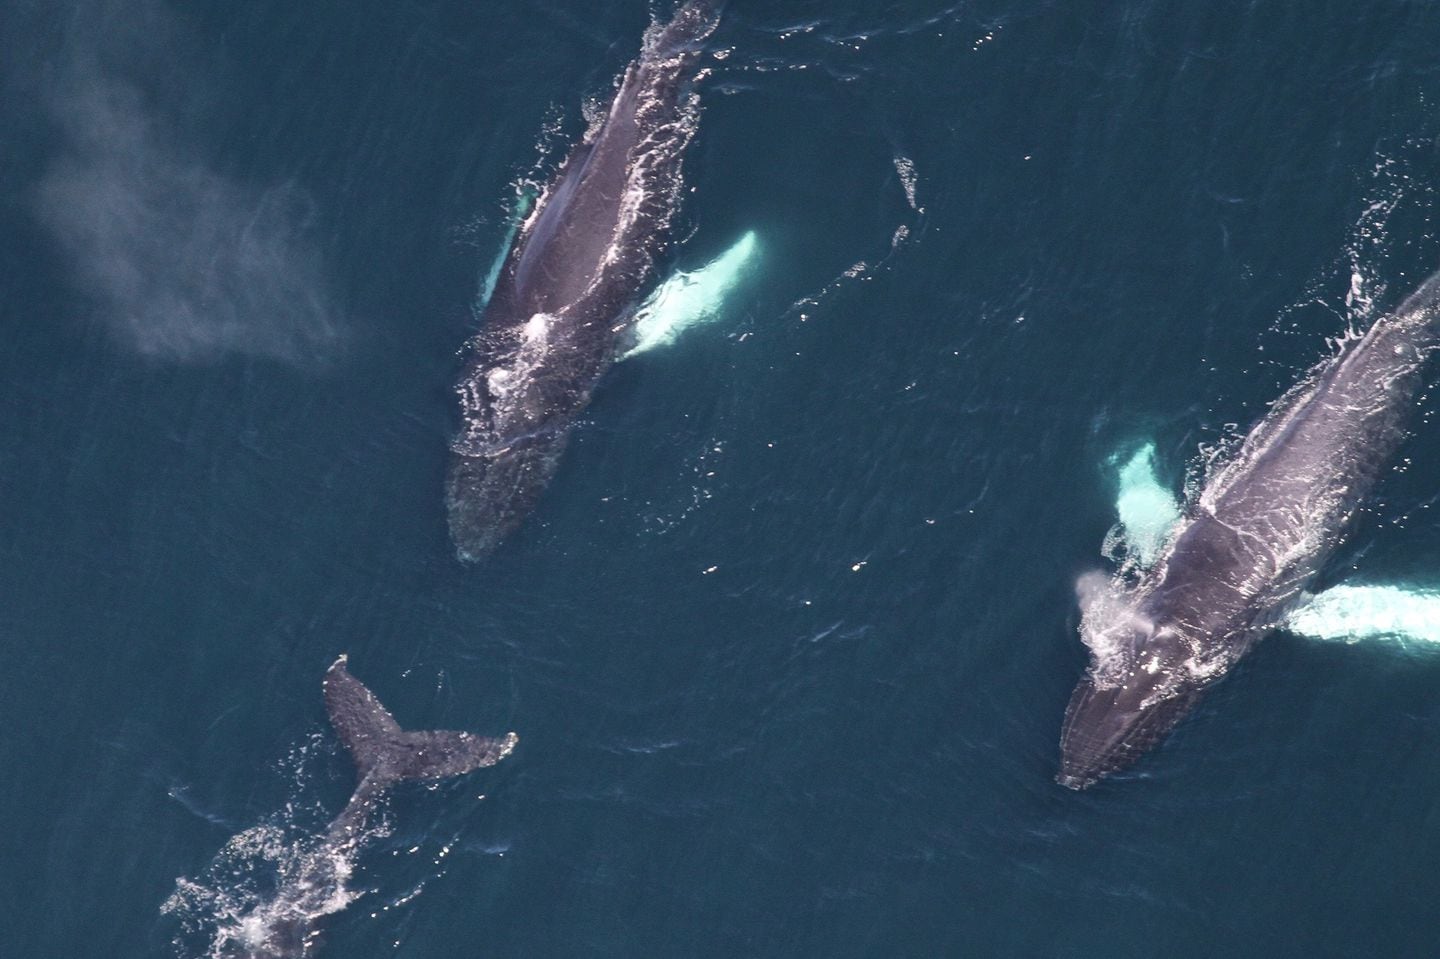 Researchers spotted 161 whales south of Martha's Vineyard and southeast of Nantucket during a recent aerial survey.